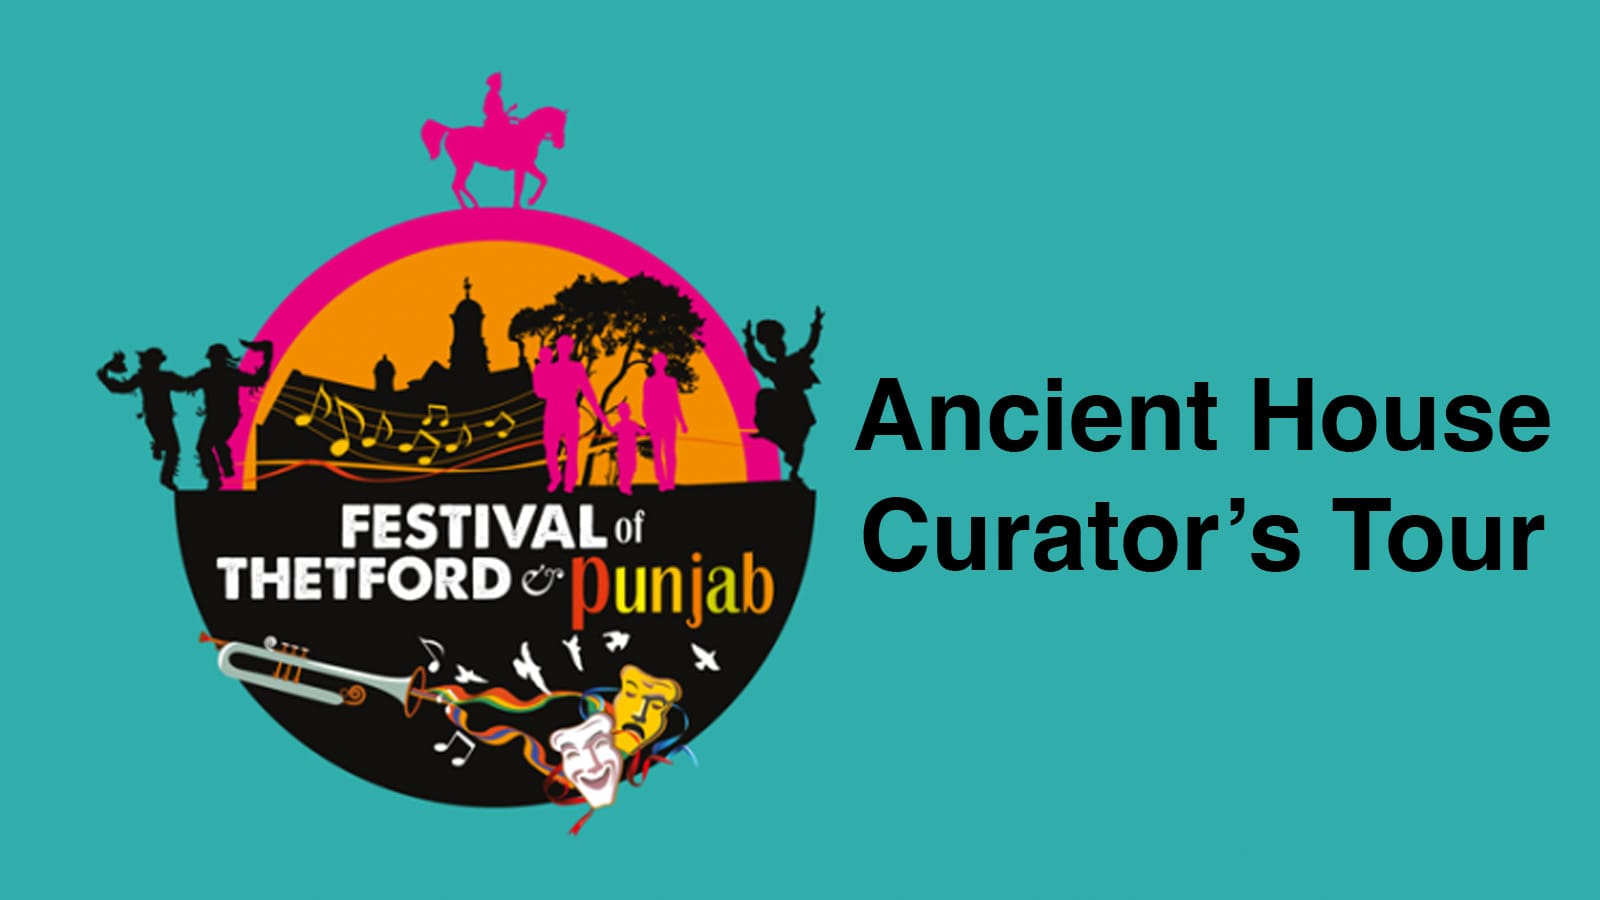 Thetford Bubbly Hub what's on and events Festival of Thetford and Punjab Curators Tour Ancient House